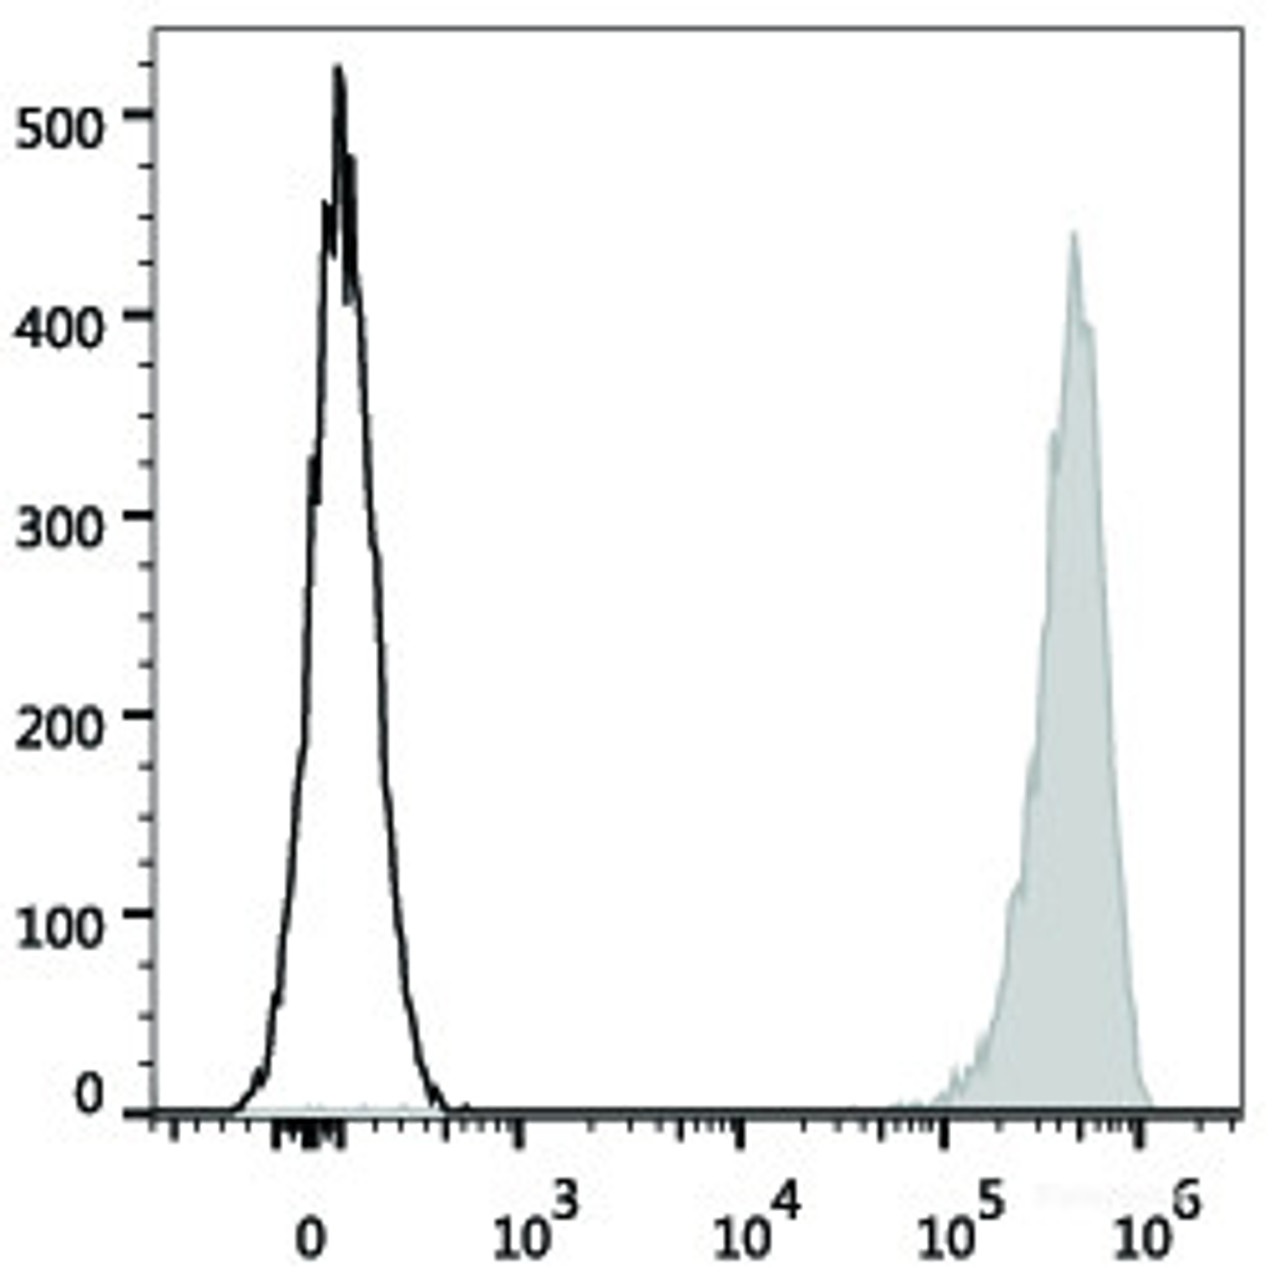 Human platelets are stained with AF647 Anti-Human CD41 Antibody(filled gray histogram). Unstained platelets (empty black histogram) are used as control.